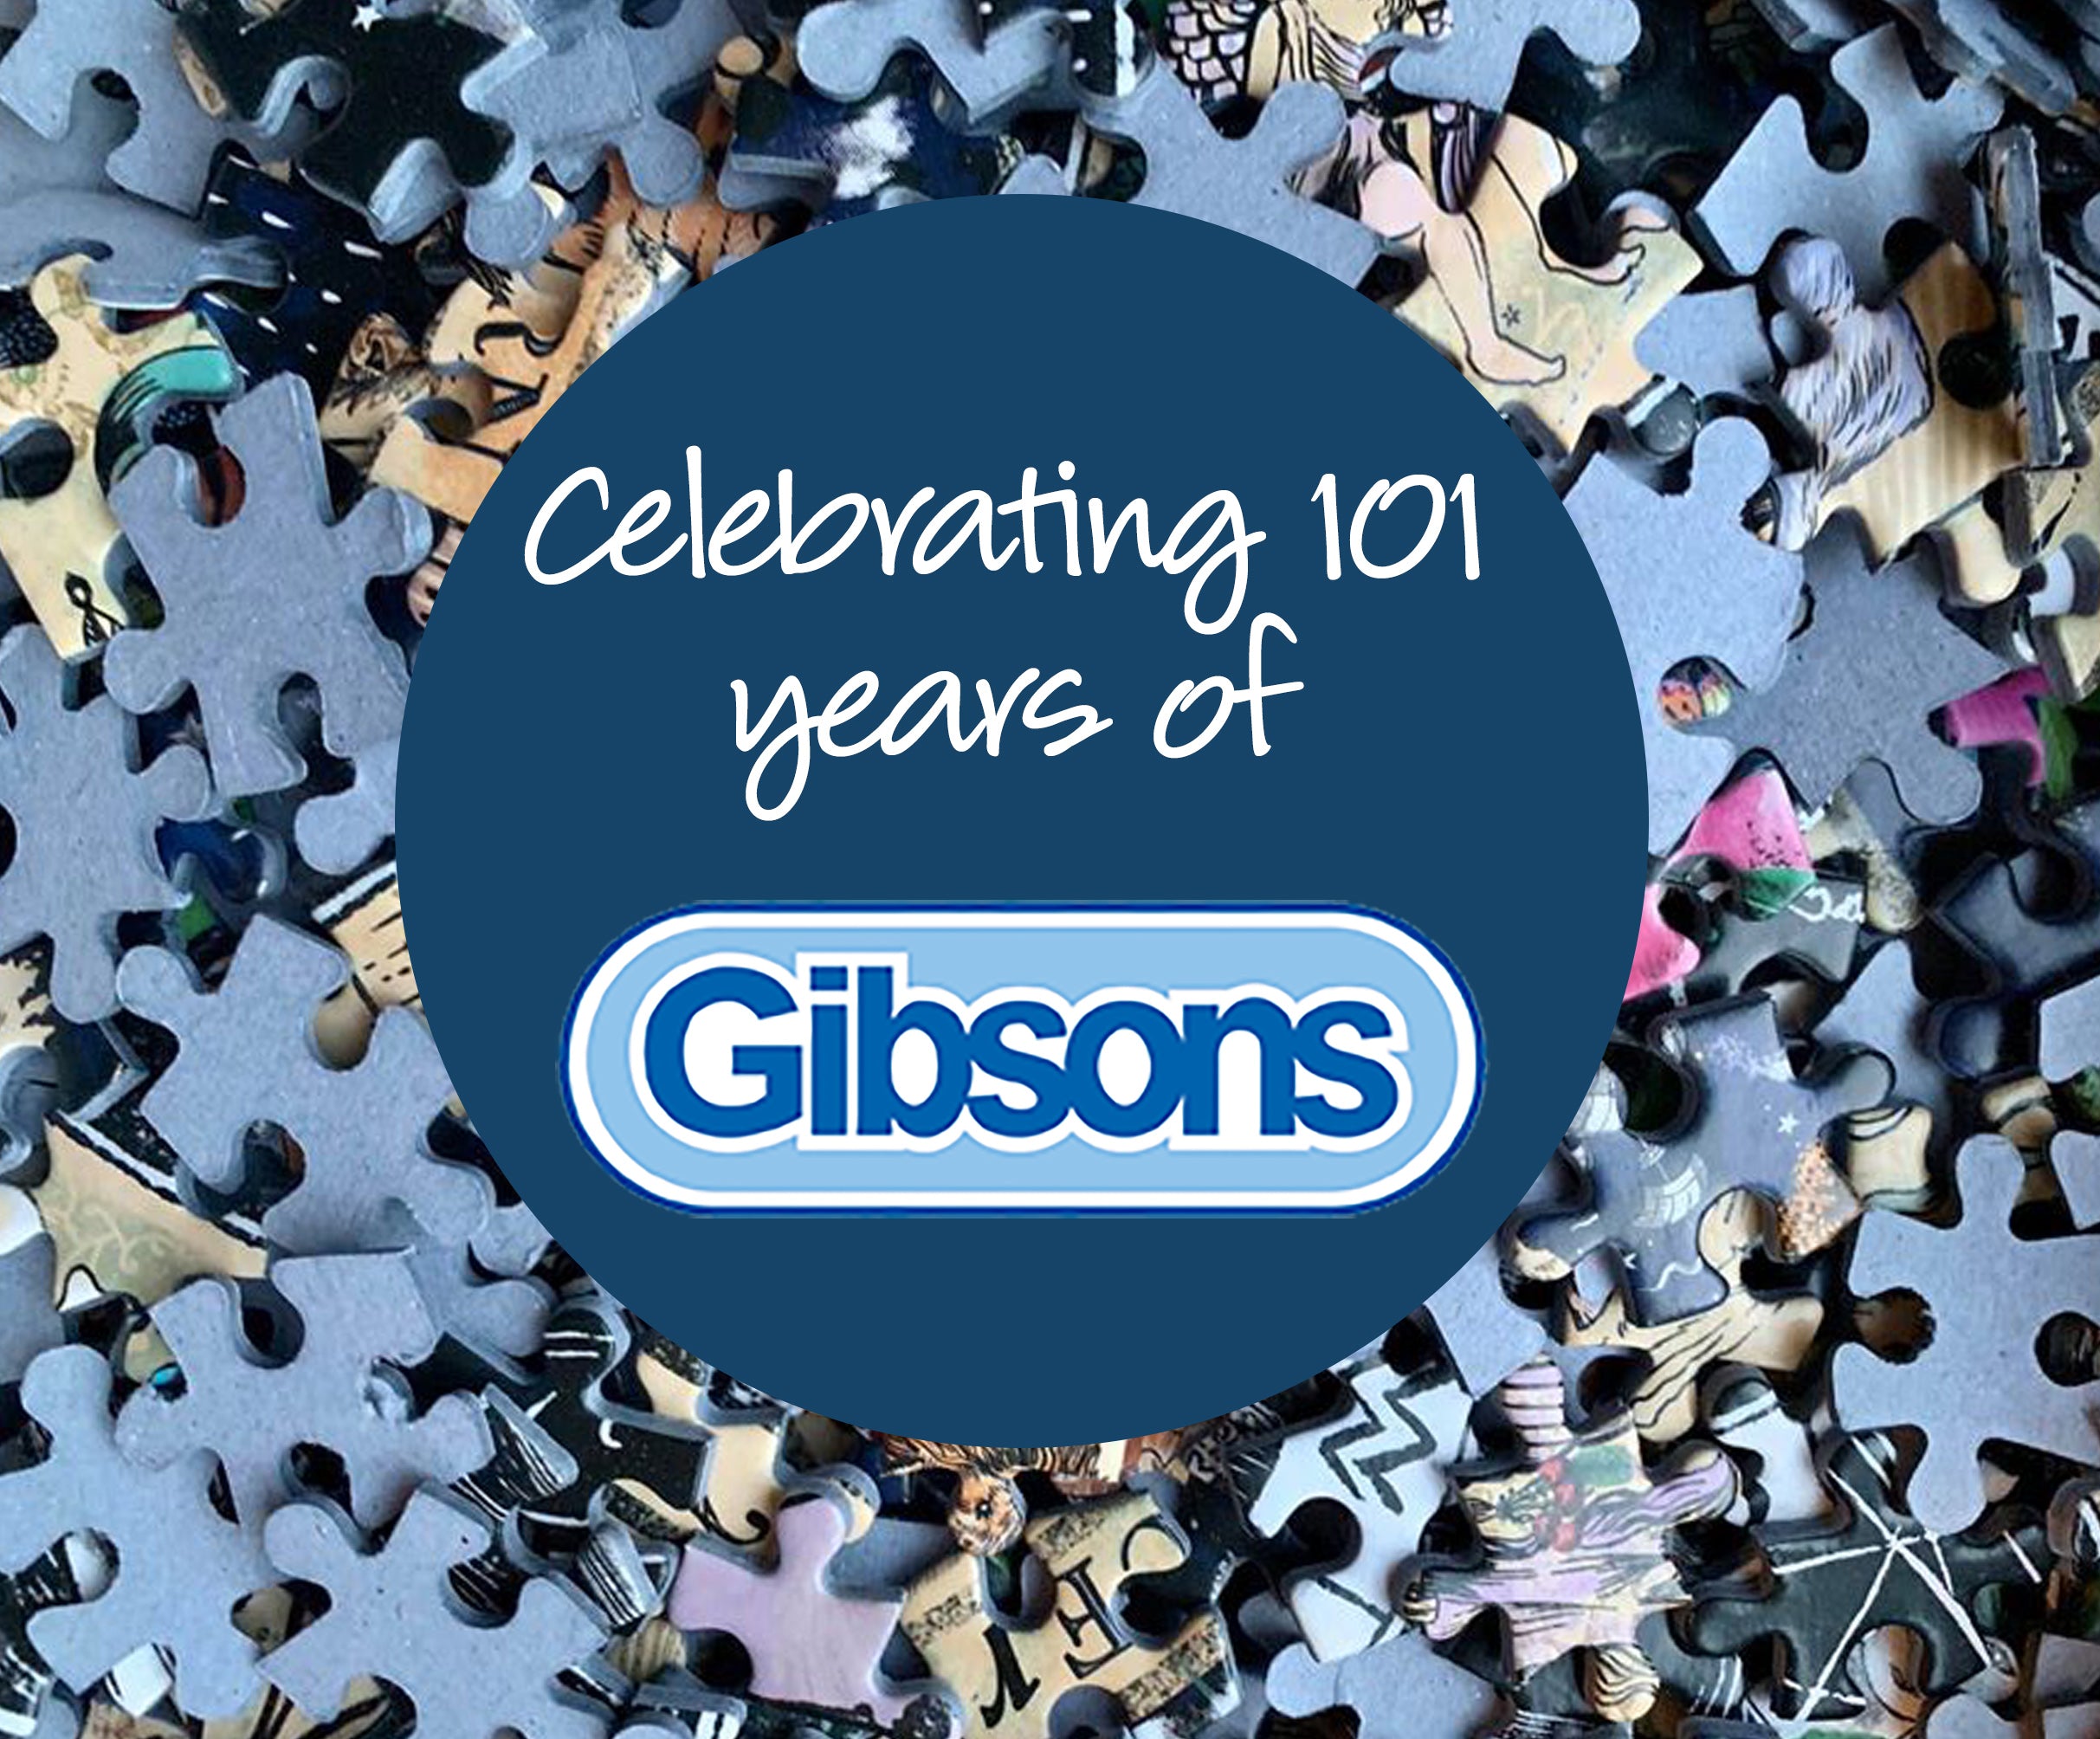 Celebrating 101 Years of Gibsons